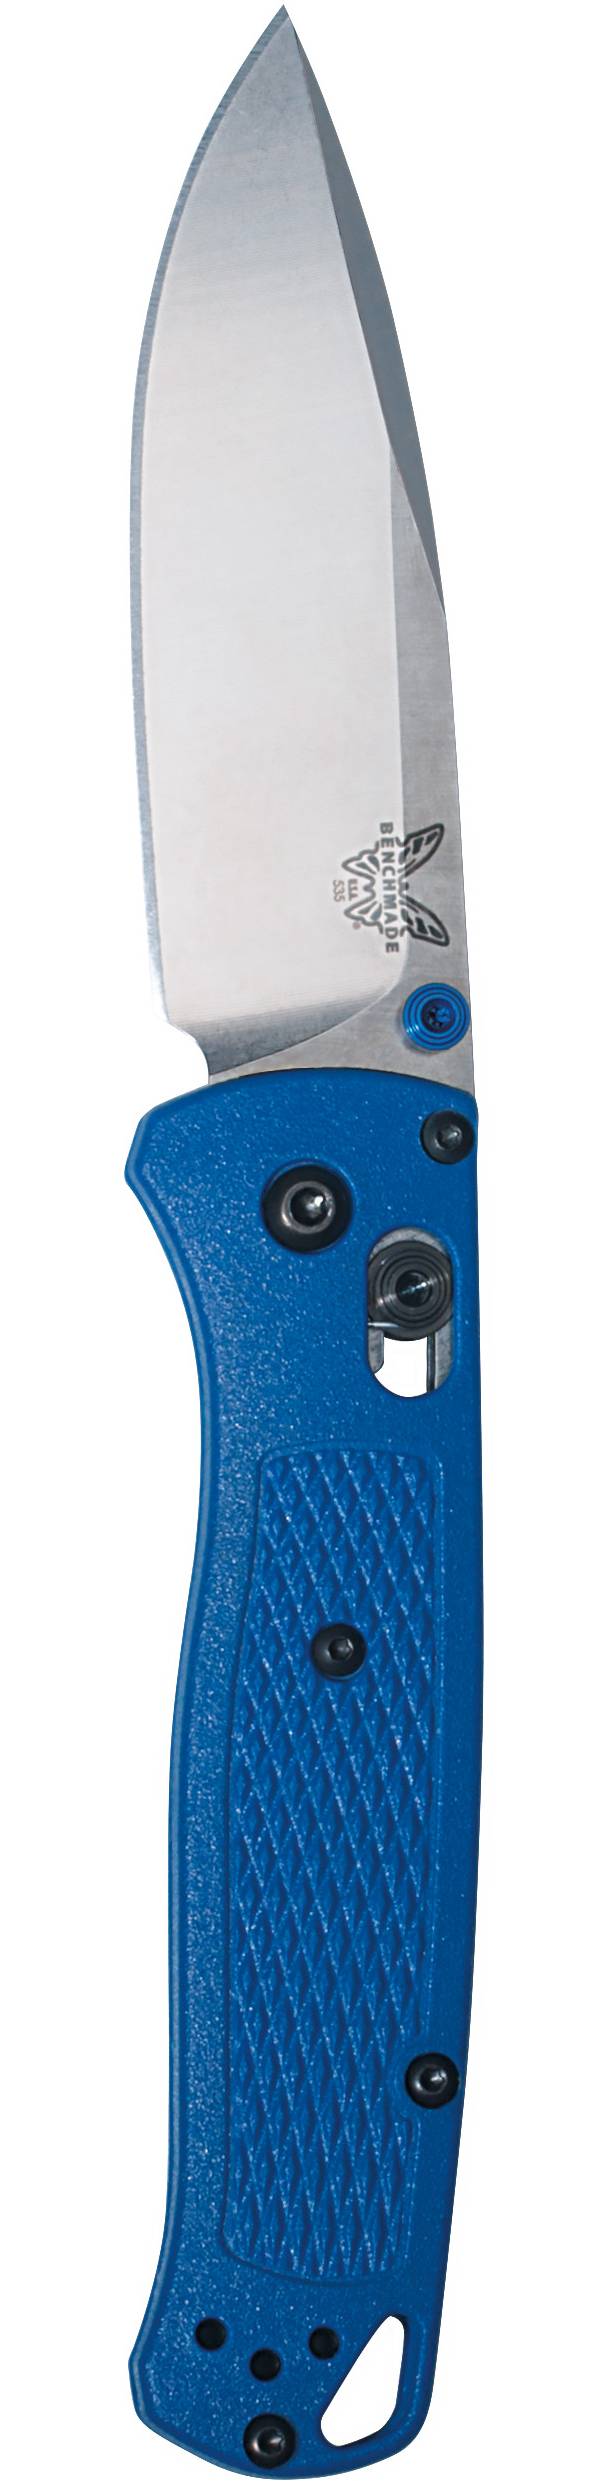 Benchmade Bugout Knife product image